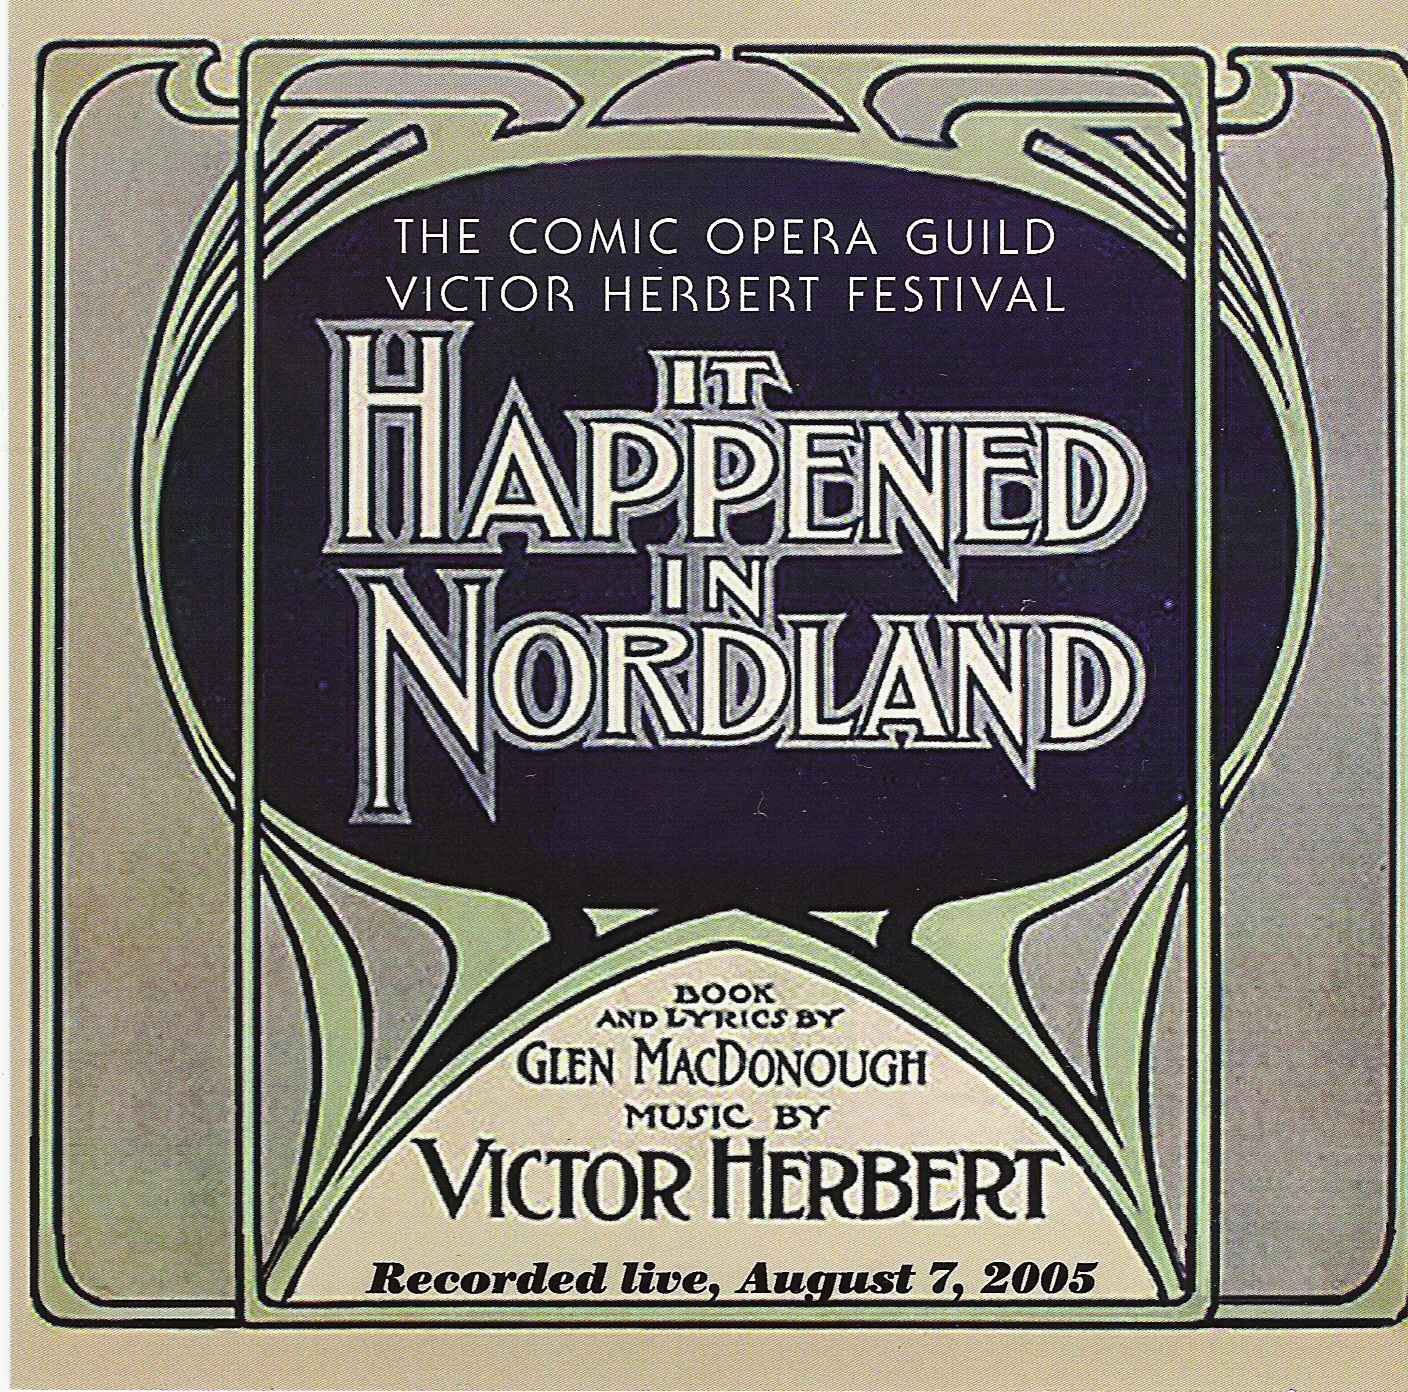 It Happened in Nordland CD cover